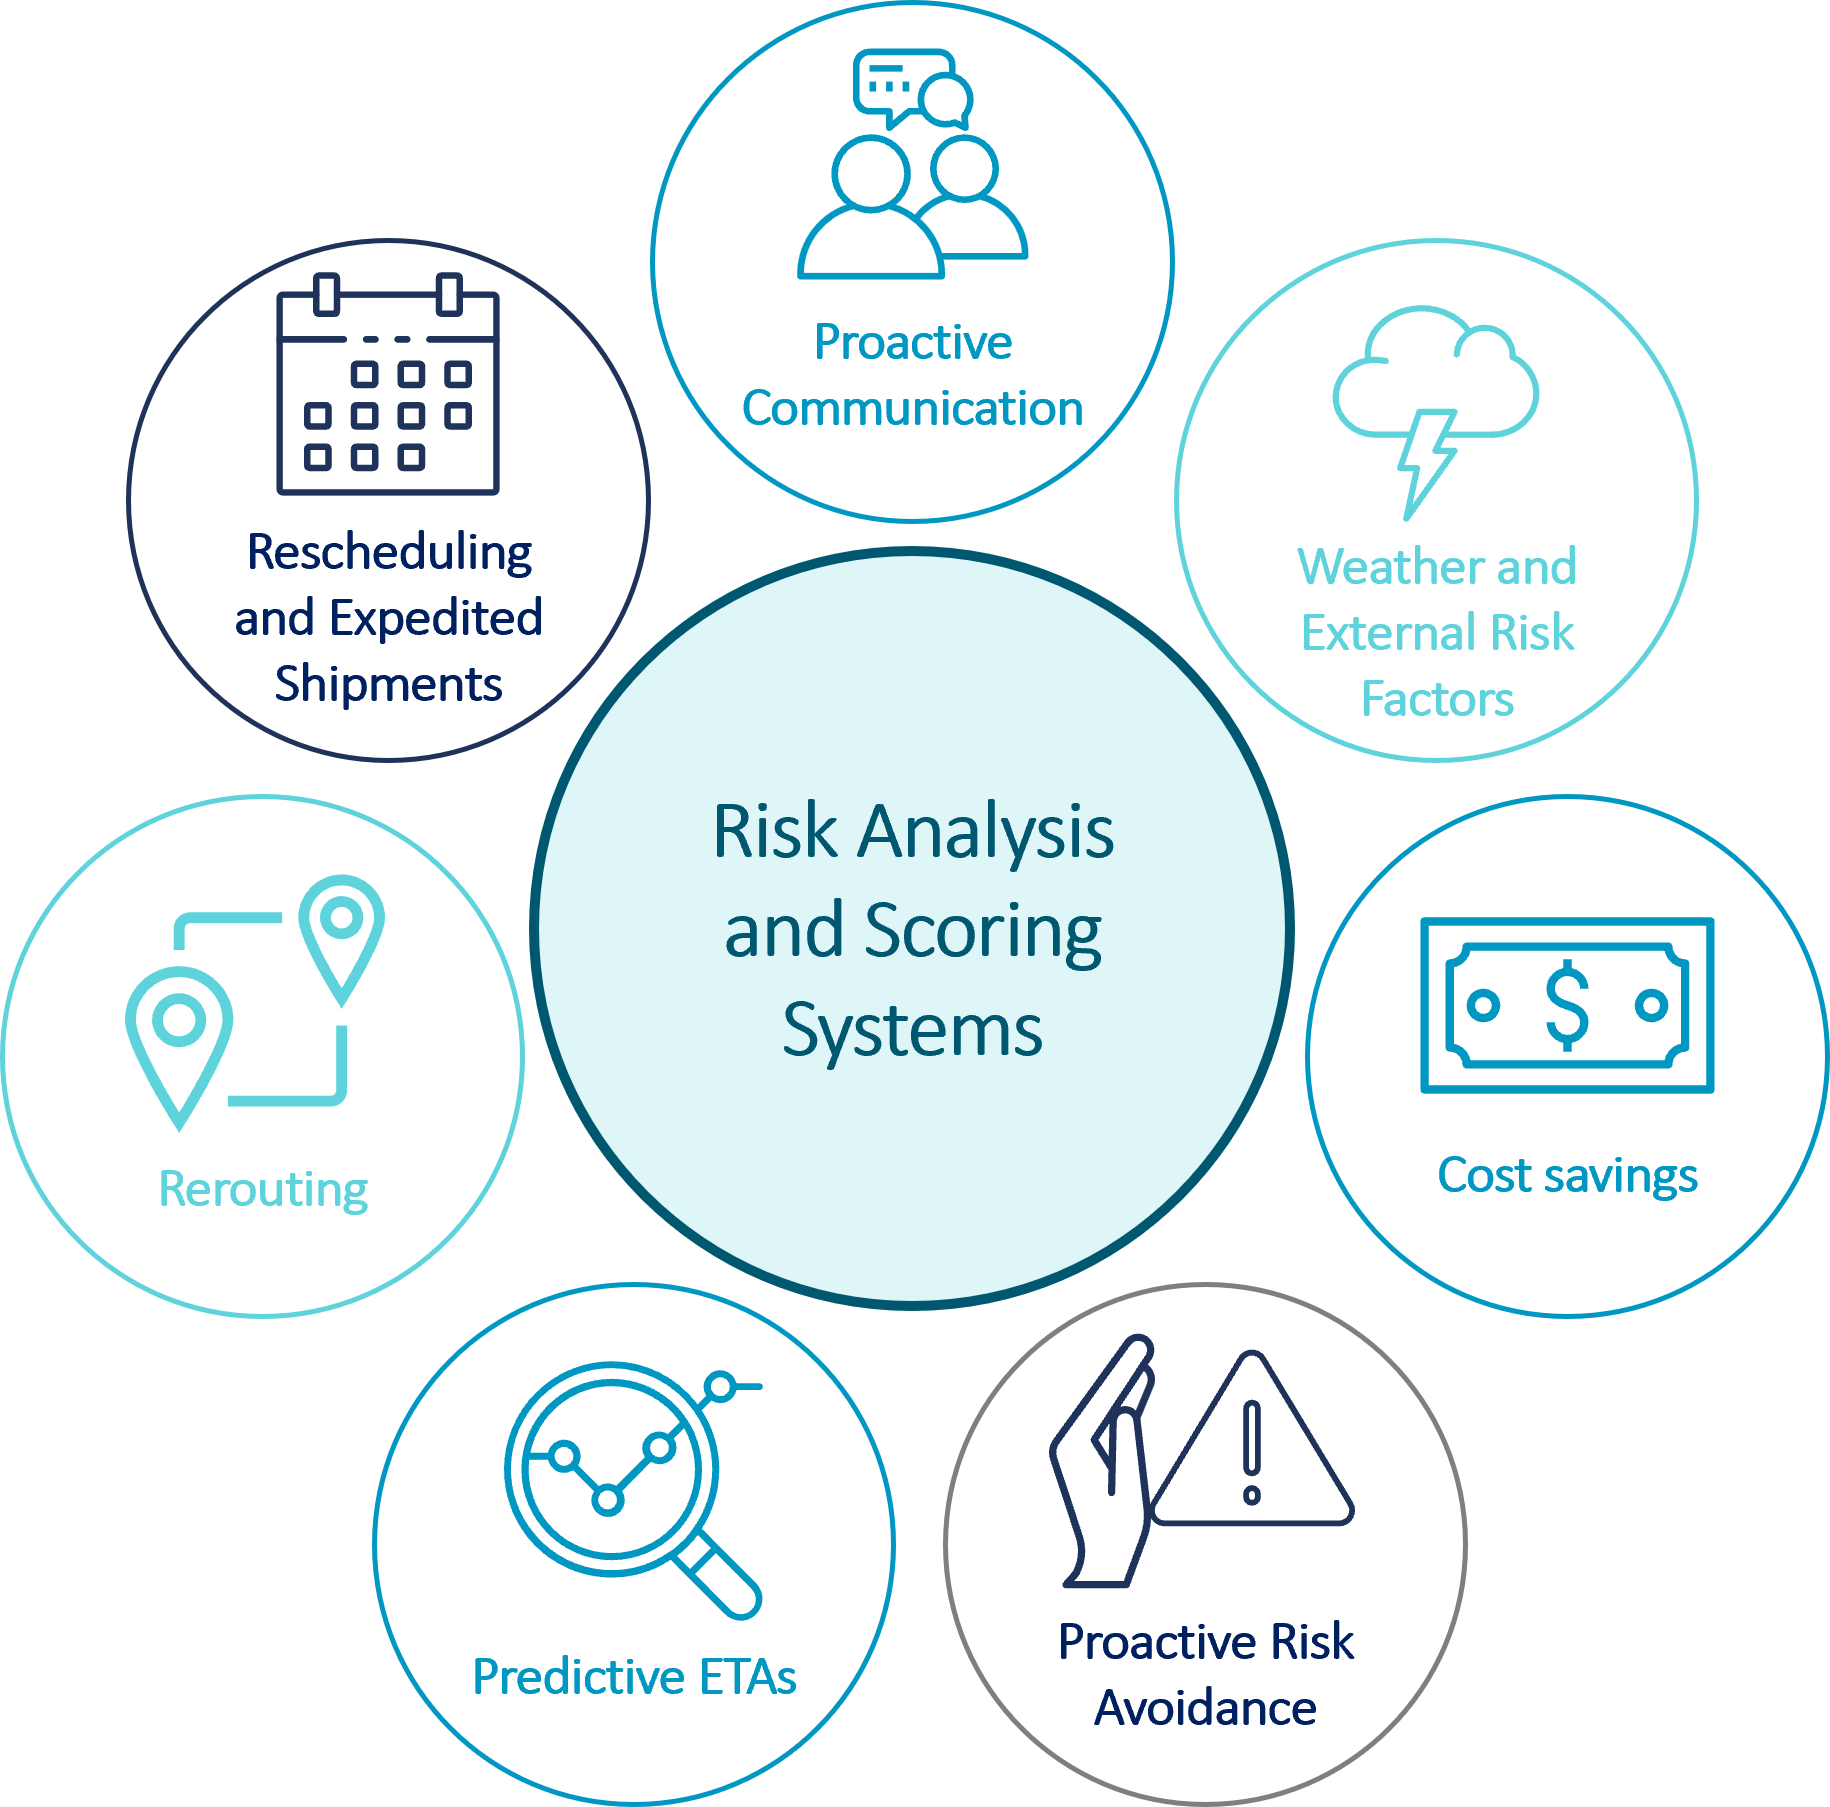 Figure 3 Risk analysis and scoring systems